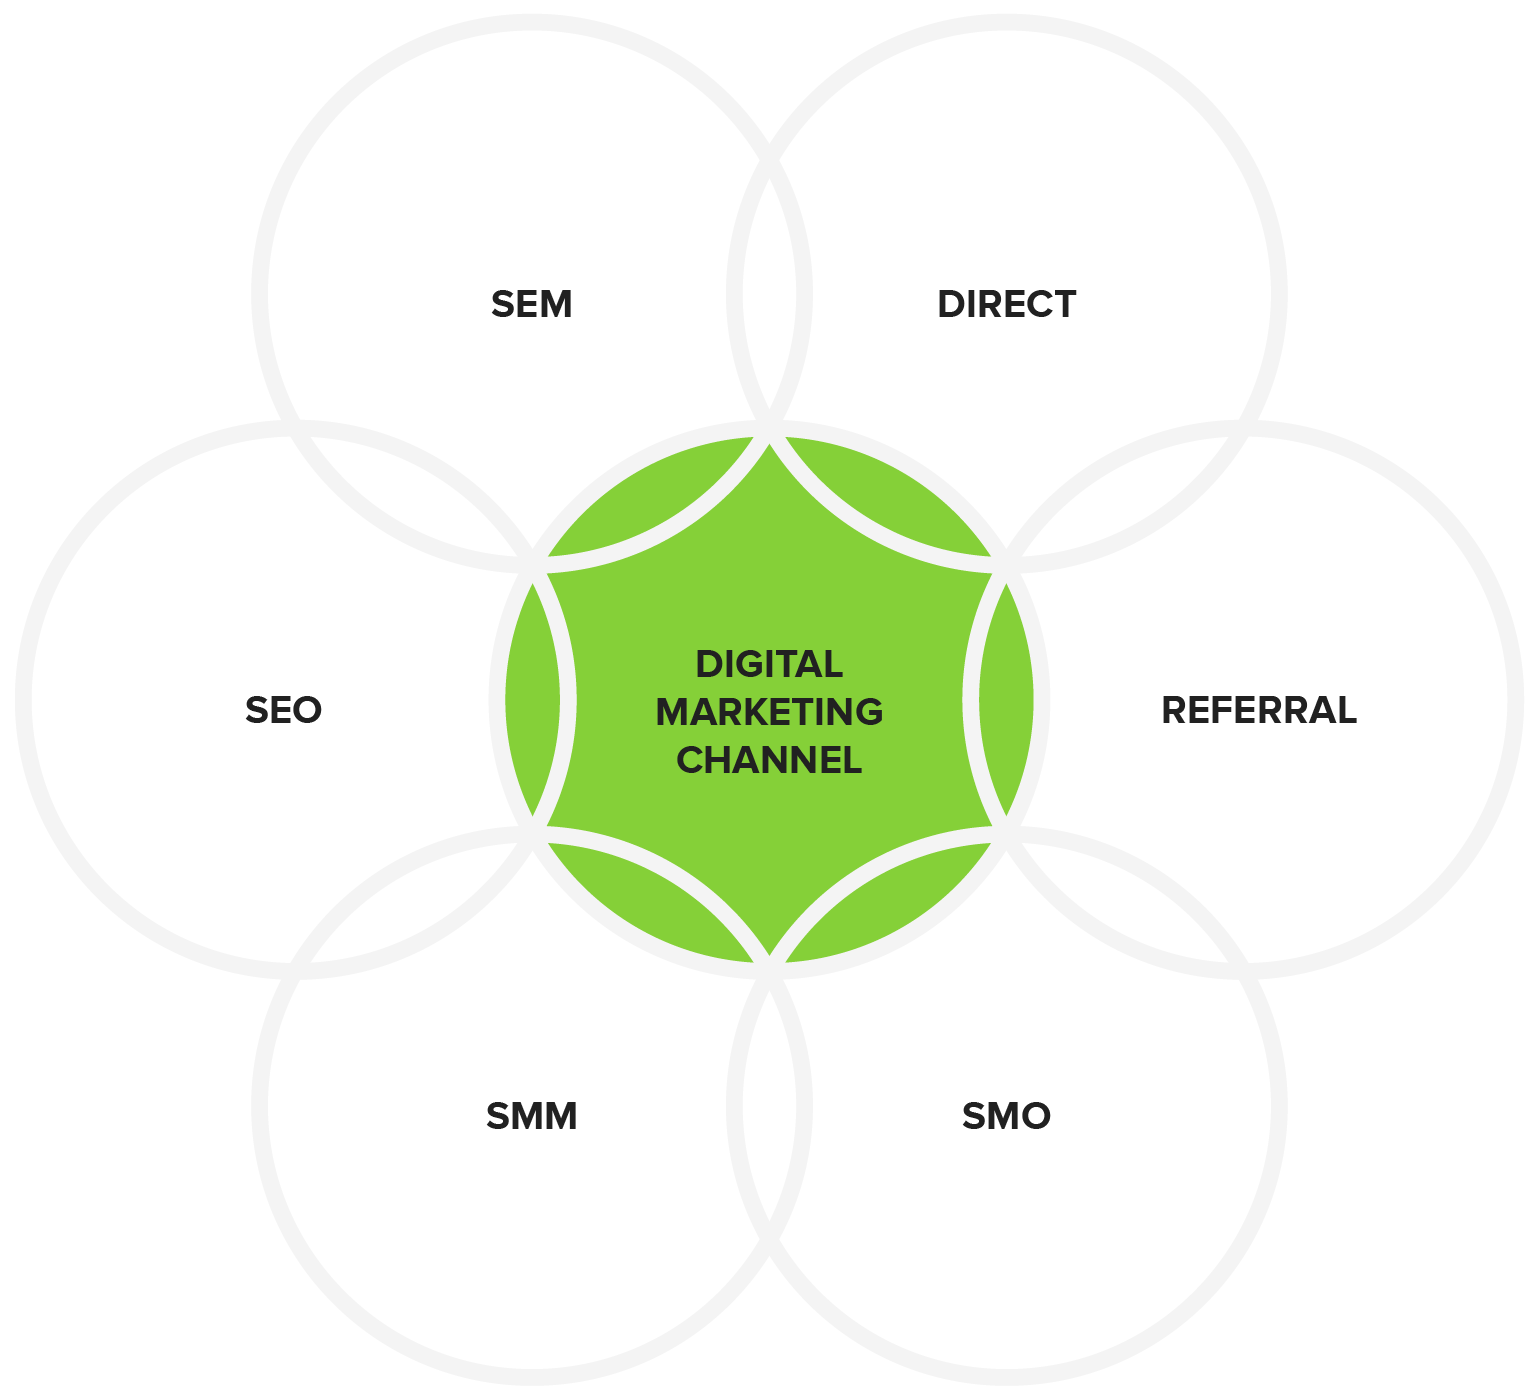 Distribution Strategy graphic with SEO, SEM, Direct, Referral, SMM, and SMO